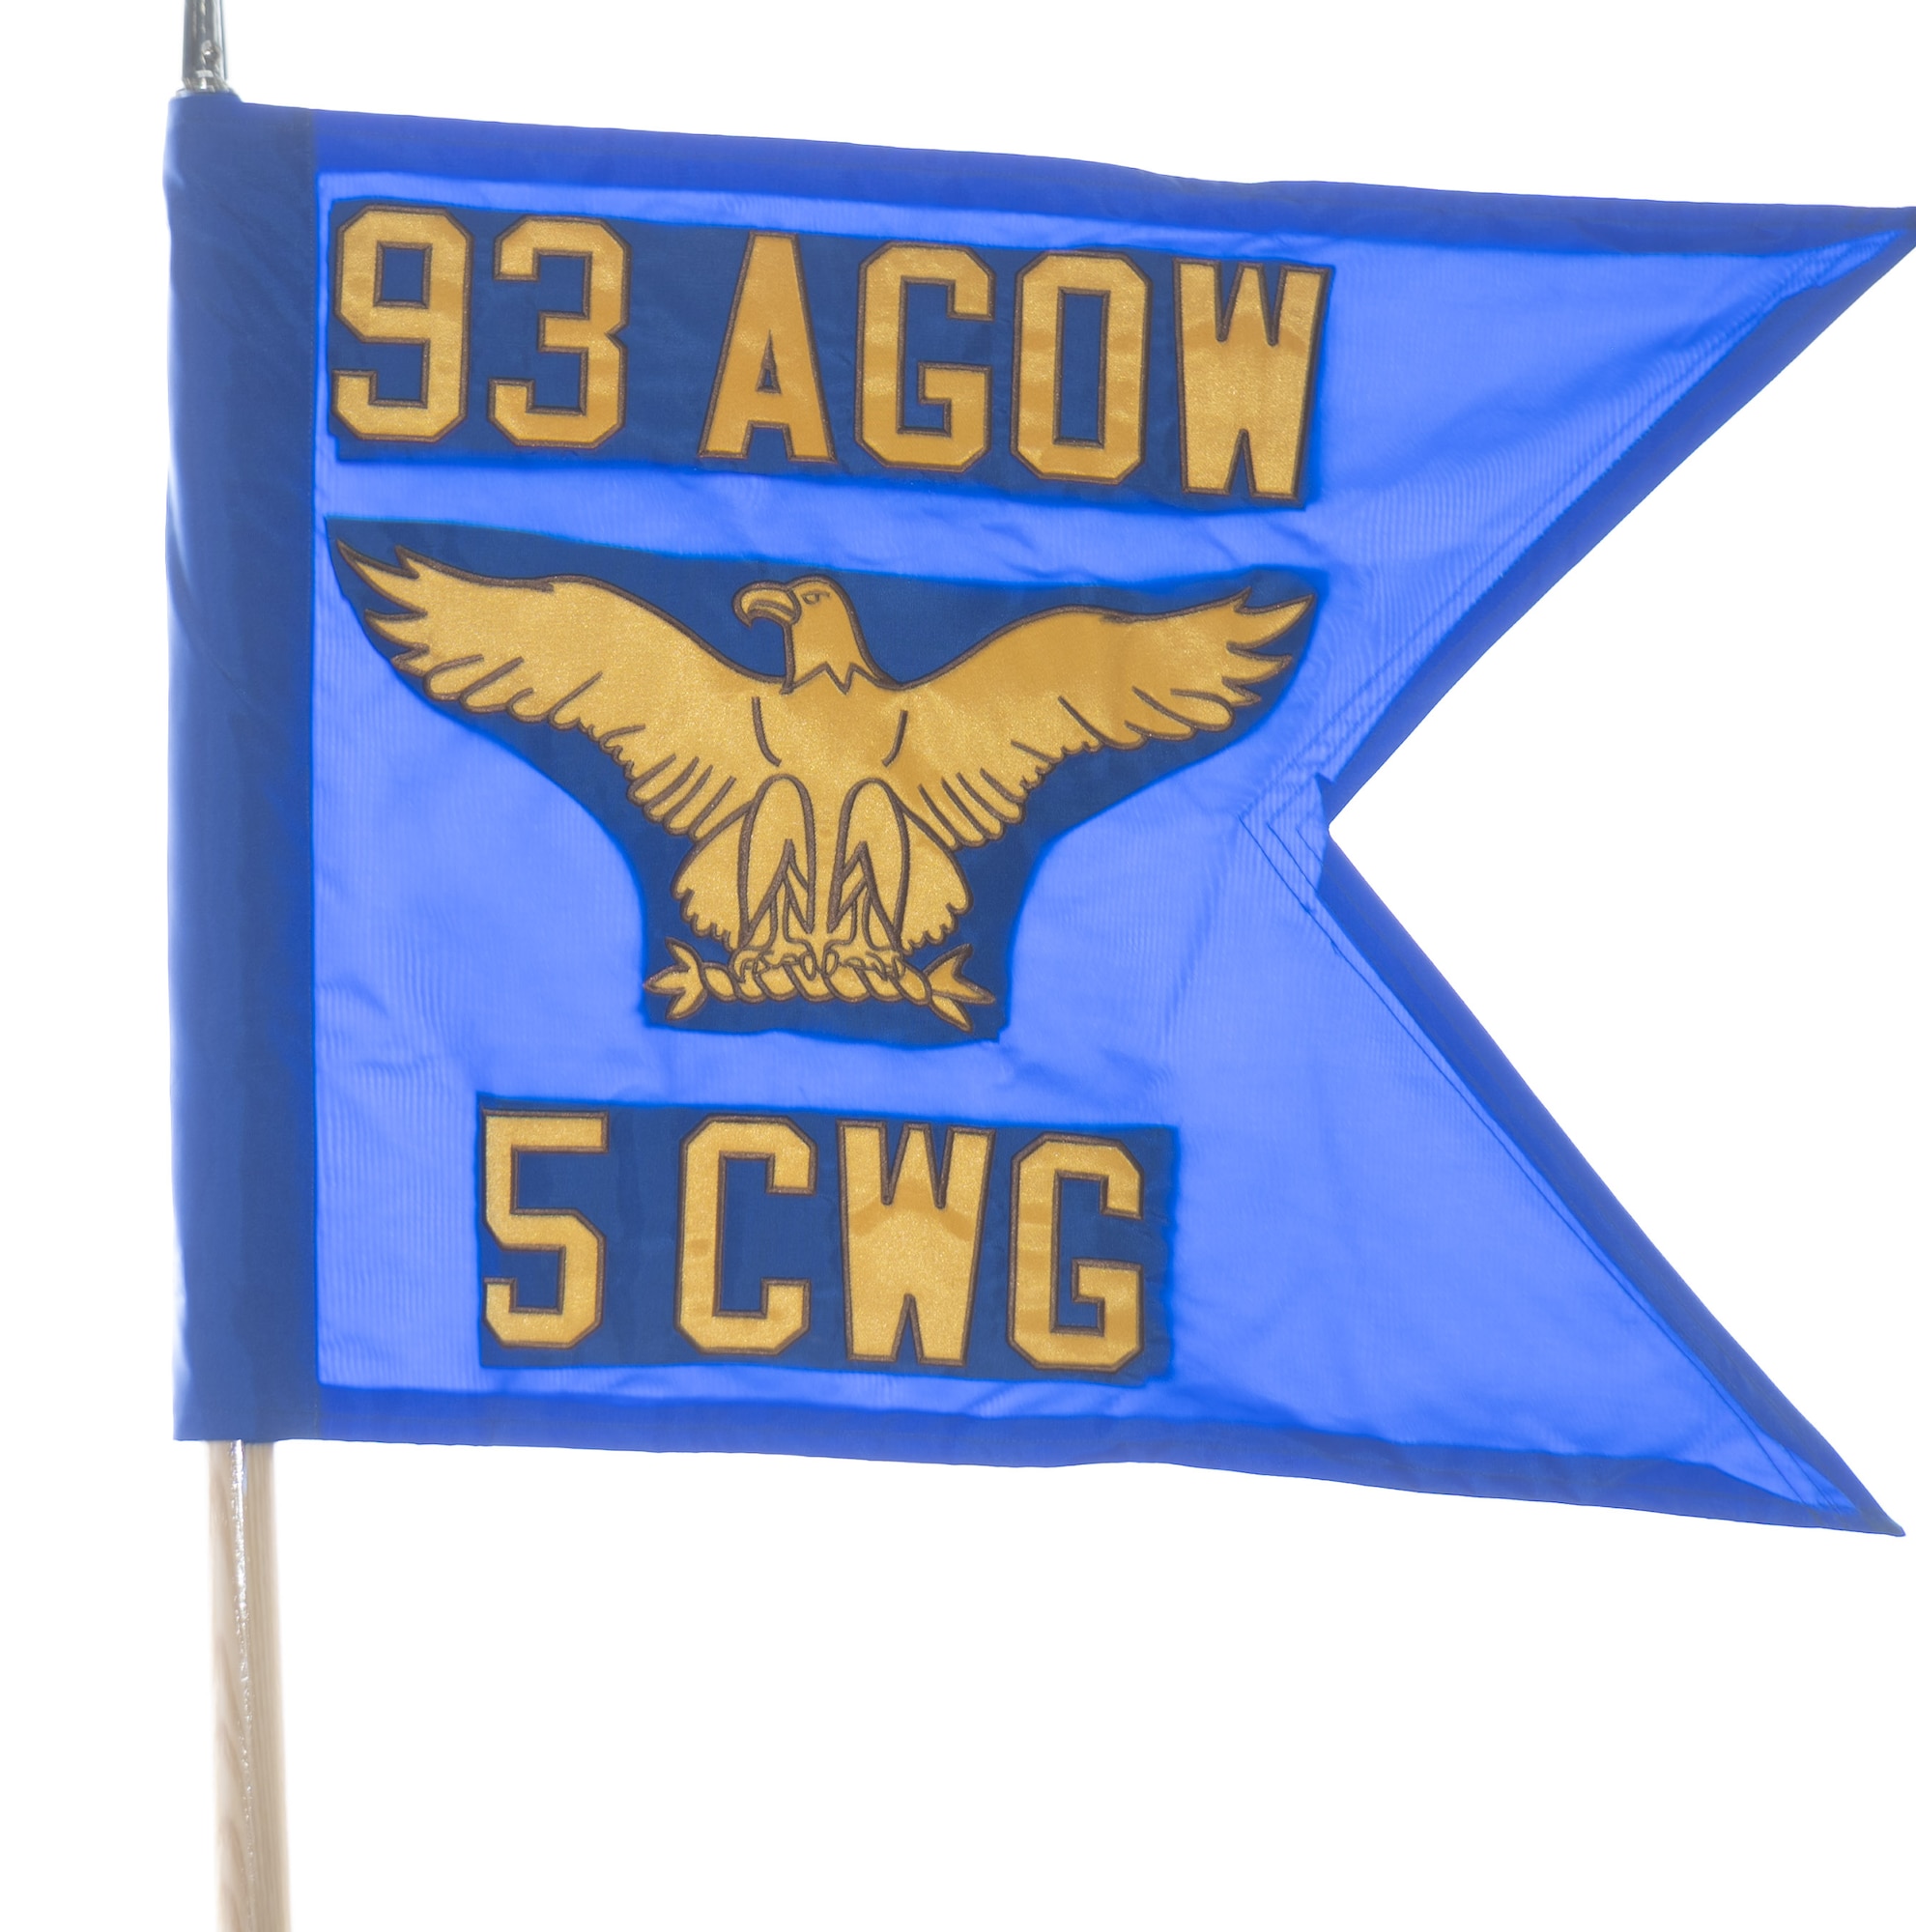 The new 5th Combat Weather Group guidon is unfrilled during the 5th Combat Weather Group Activation Ceremony at Fort Bragg, NC, May 5, 2022. The 5th Combat Weather Group is the first combat weather group in DoD history. (Courtesy photo)